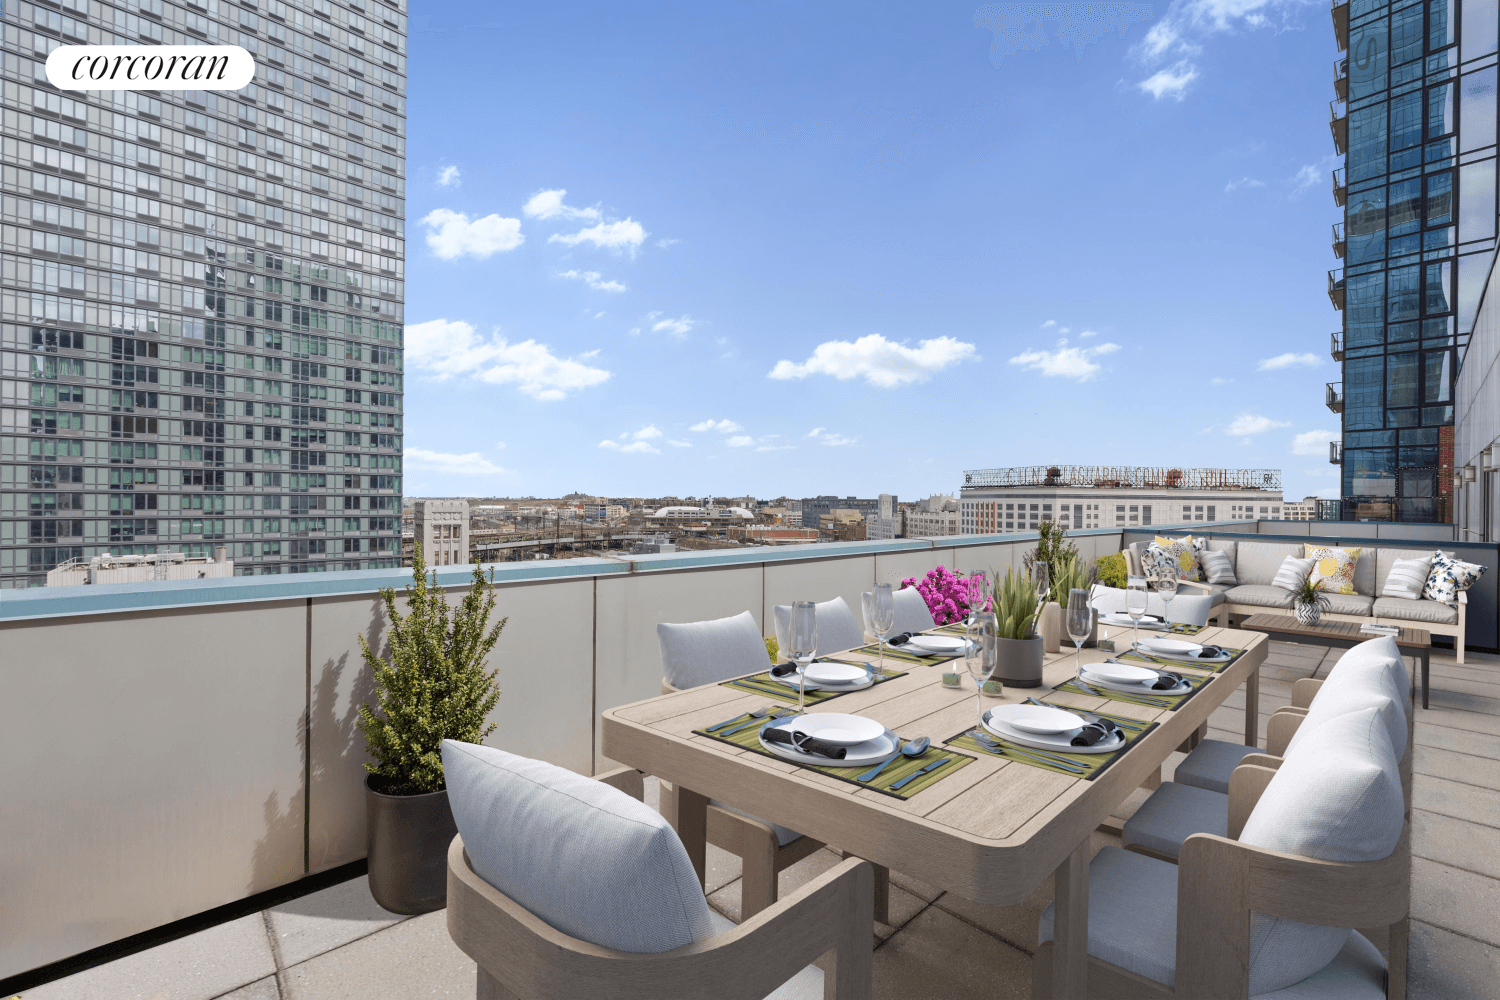 Welcome to 44 27 Purves Street, PH15C a sun drenched penthouse offering 720 square feet of interior living space complemented by an expansive 450 square feet private outdoor terrace.